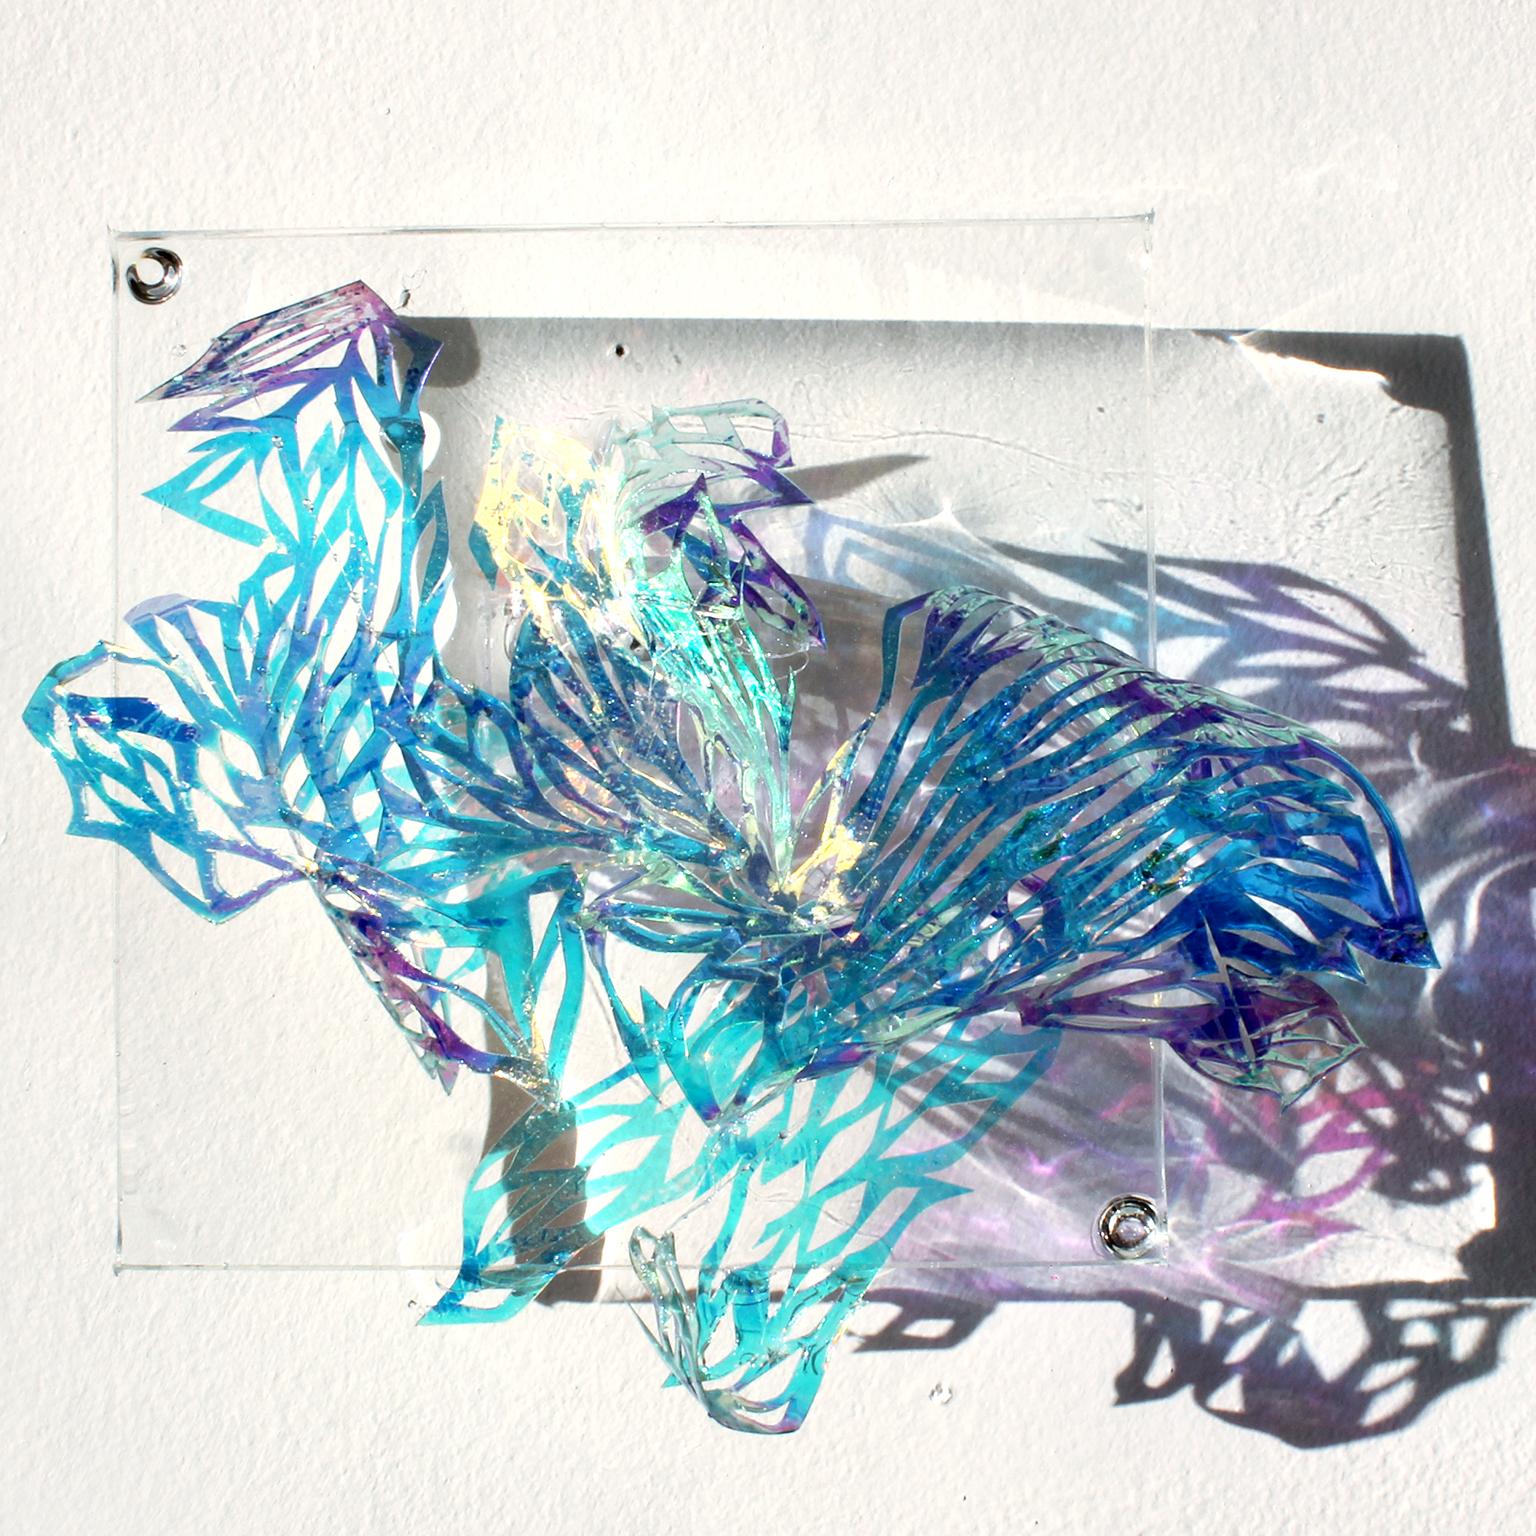 Medium: hand cut mylar, acetate, resin, acrylic  

Julia Sinelnikova is an interdisciplinary artist who works with holograms, performance, and digital culture. Her light installations have been exhibited internationally, and she has performed widely